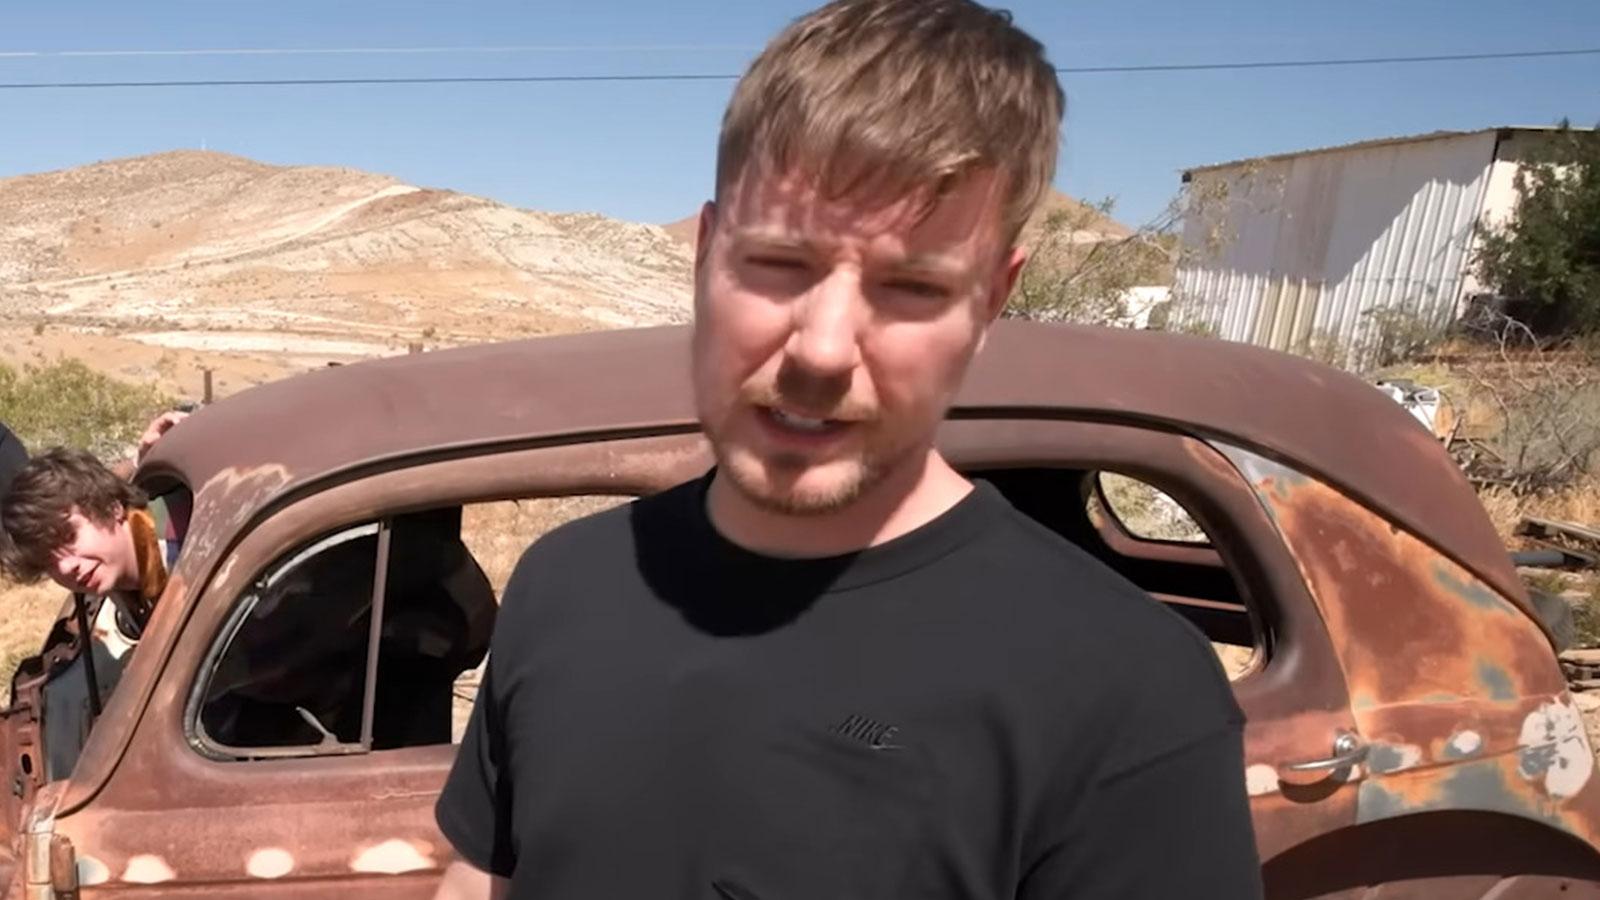 MrBeast standing in front of rusty old car